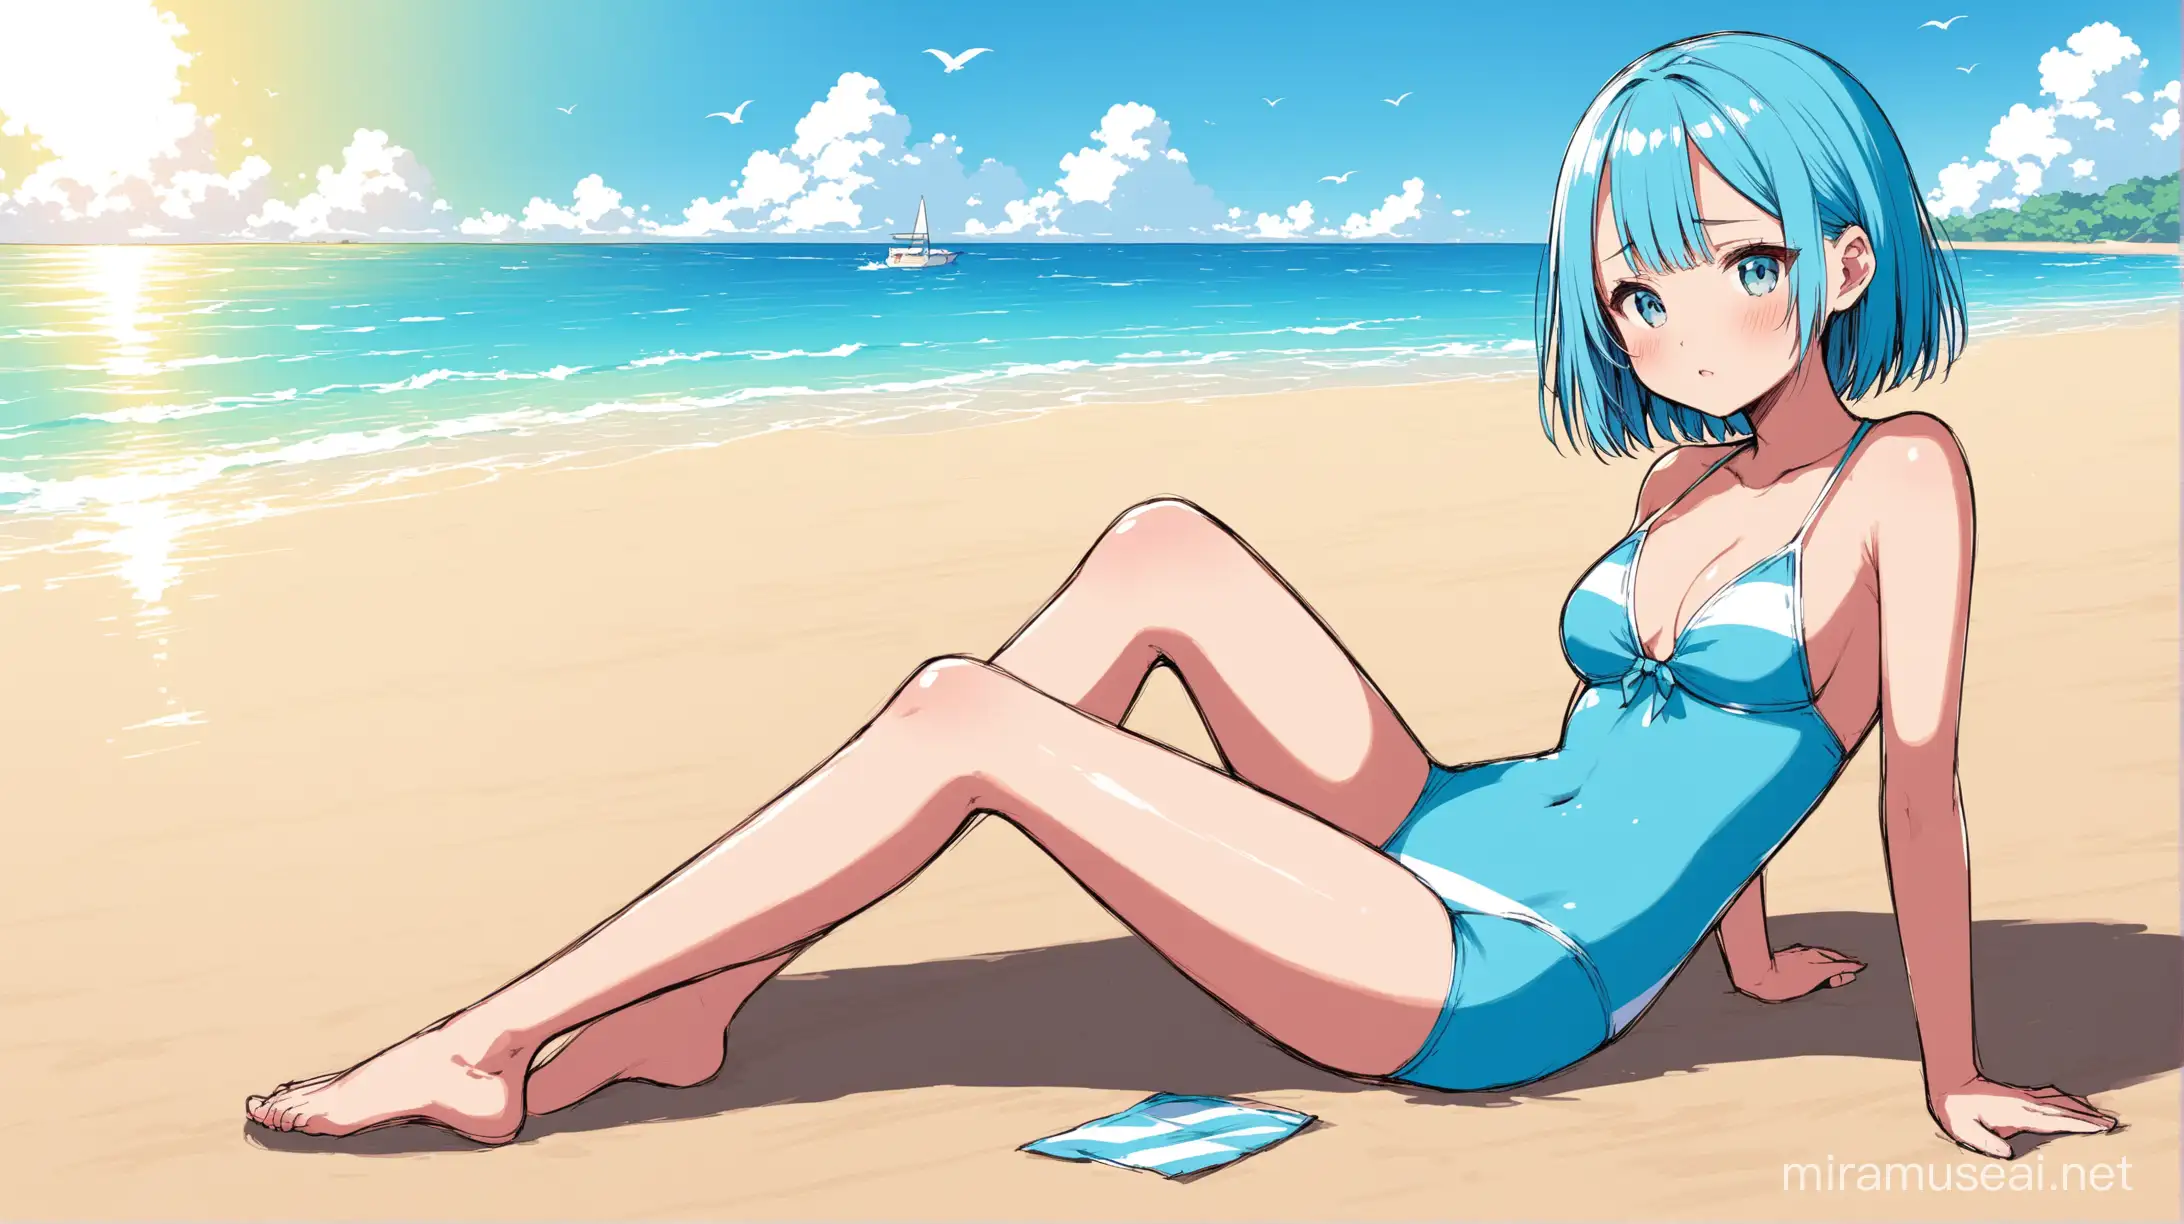 Draw the character Rem sitting at the beach wearing a swimsuit